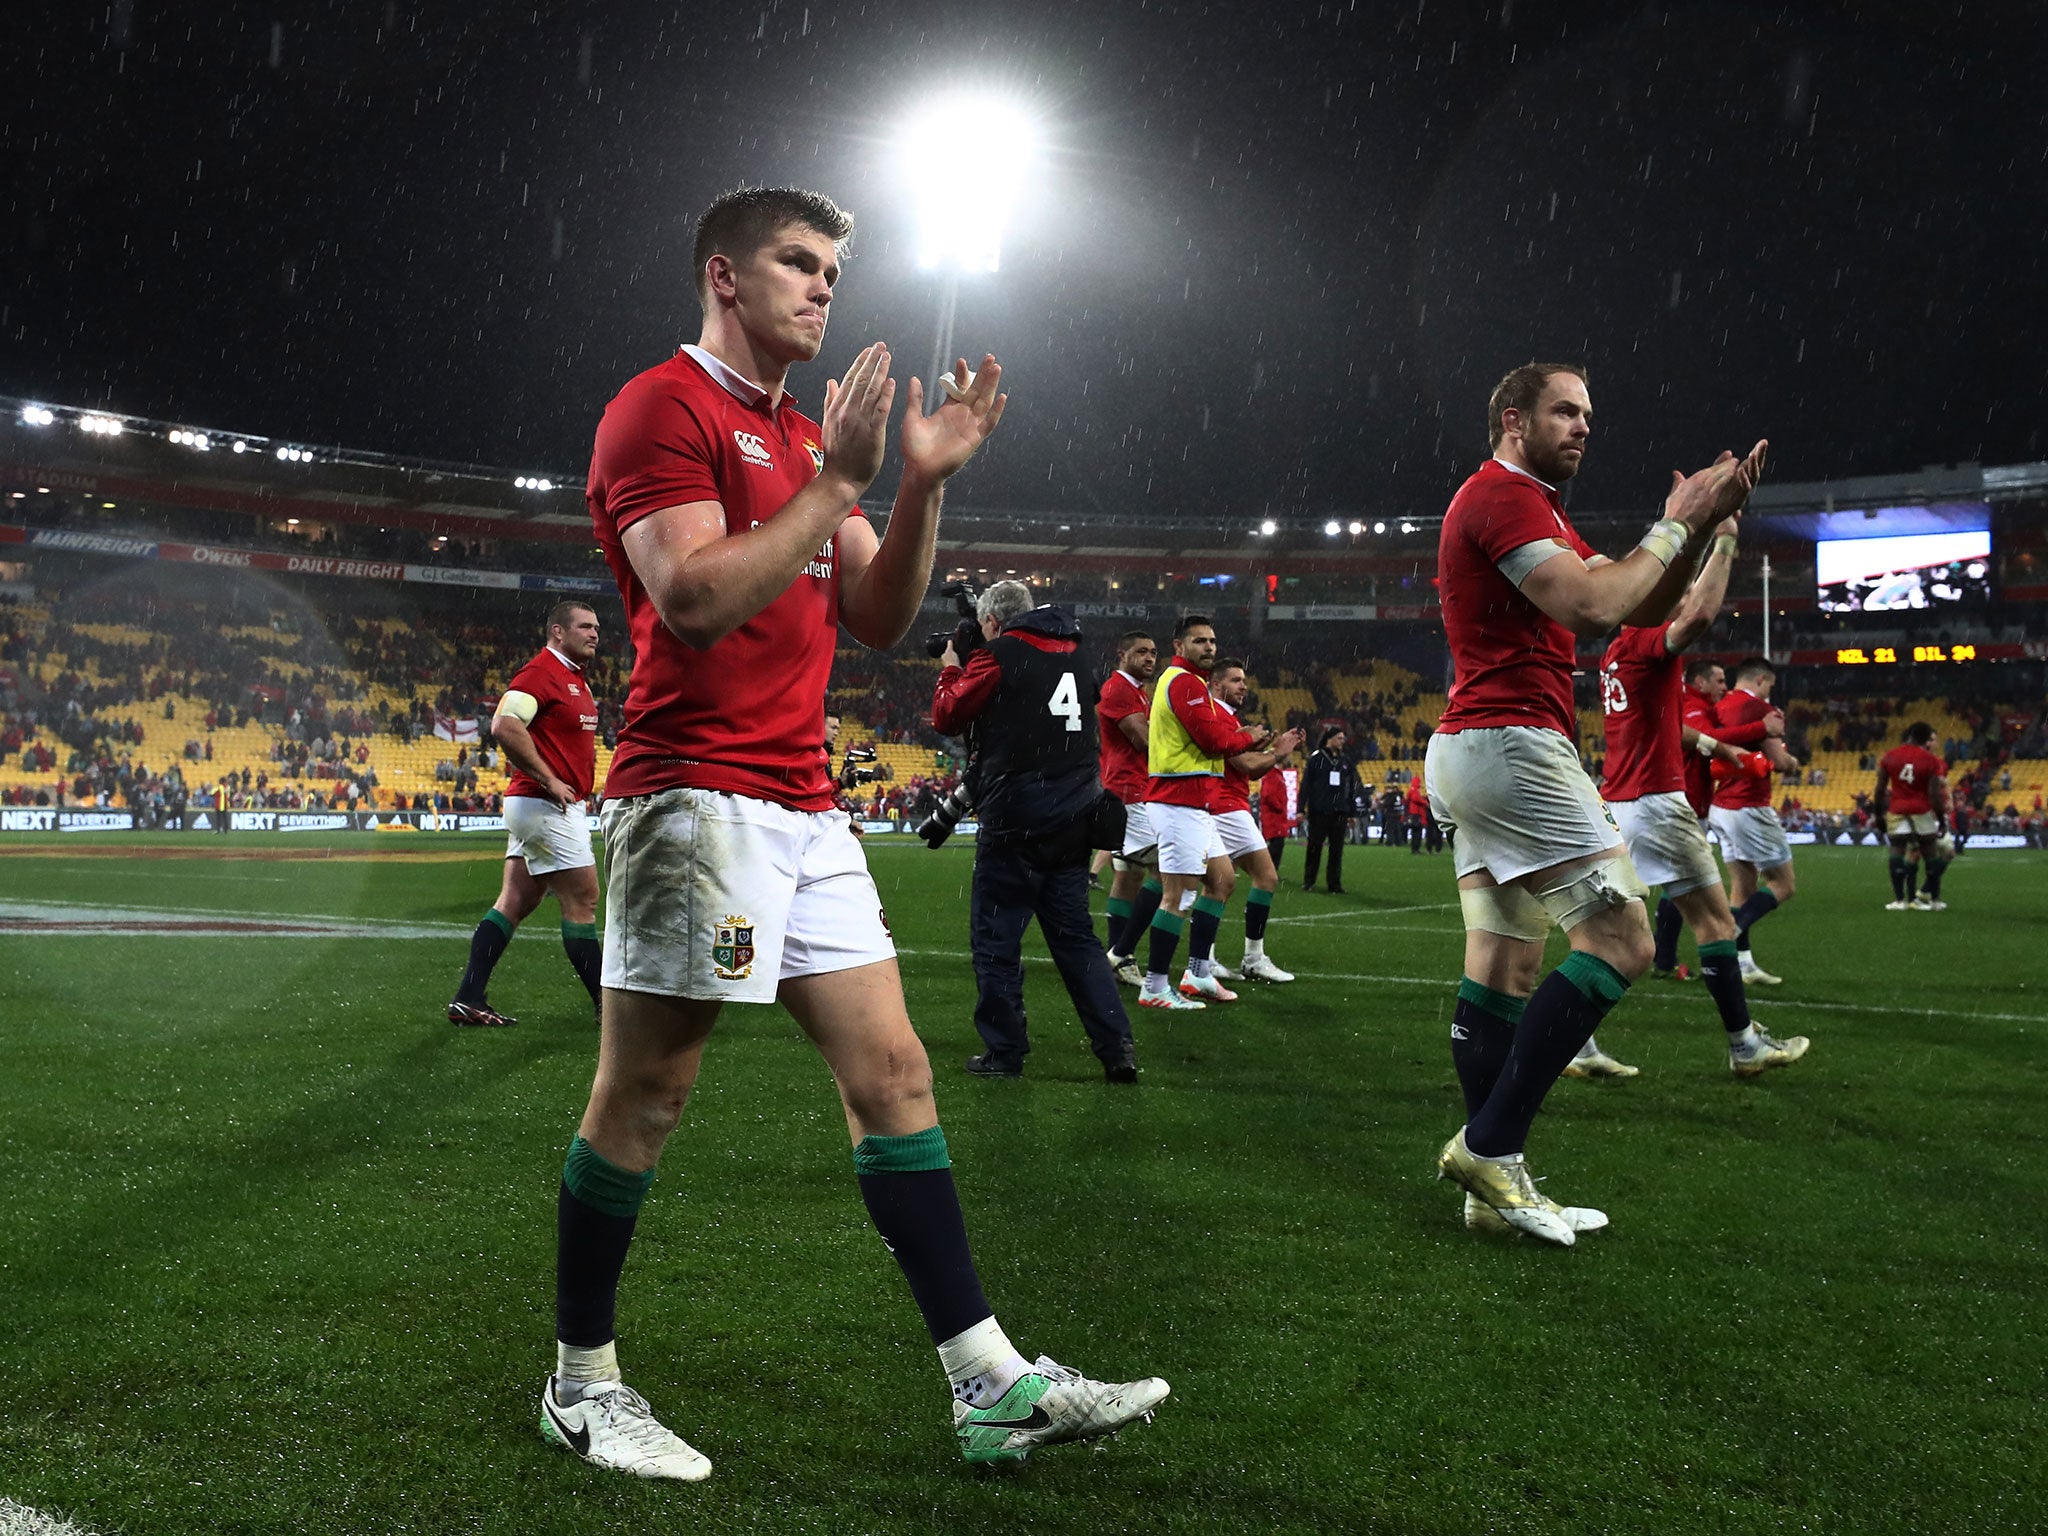 Owen Farrell kicked the winning penalty for the Lions